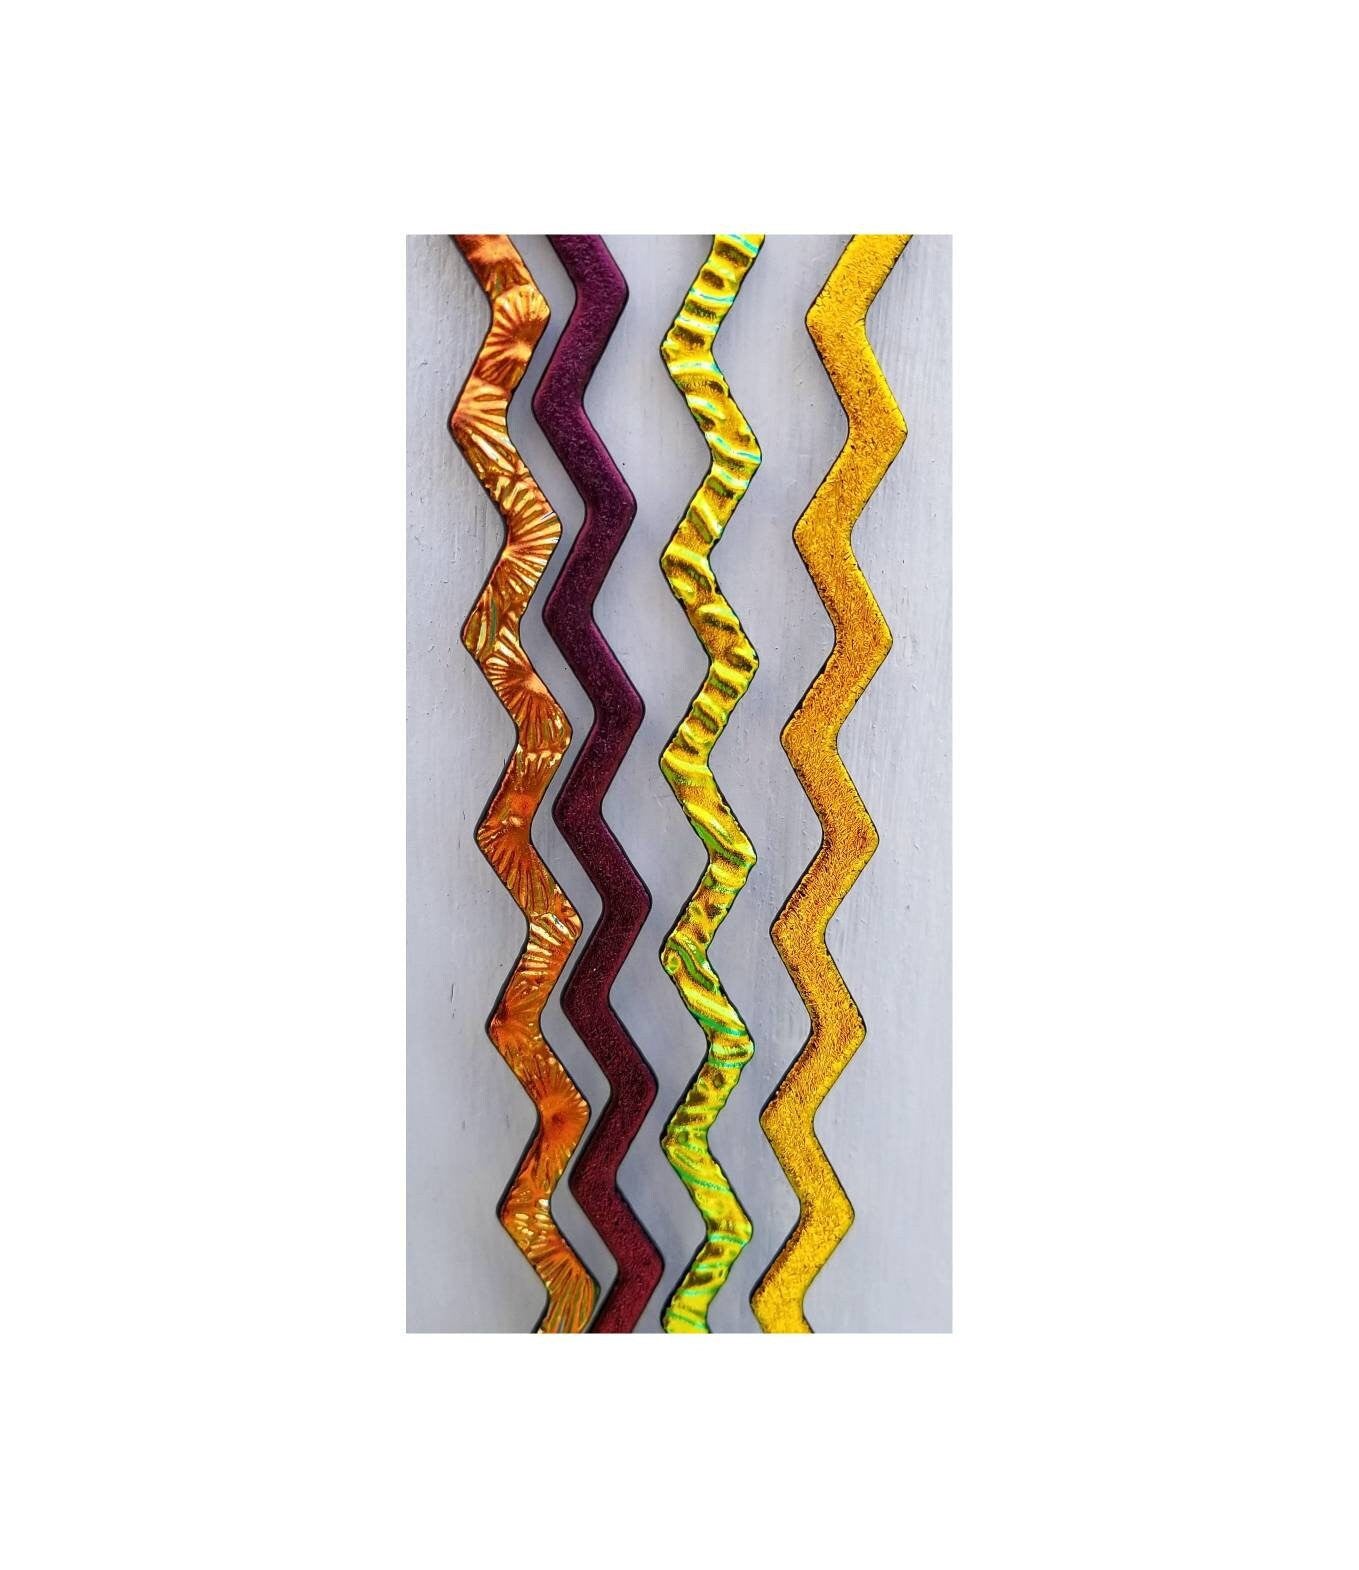 Dichroic Sheet Glass. Fire Strips on Black. Orange, Pink, Red, Yellow. Coe 90 Fusible. Diy Jewelry Supply. 4 pieces, approx. 8" wavy.